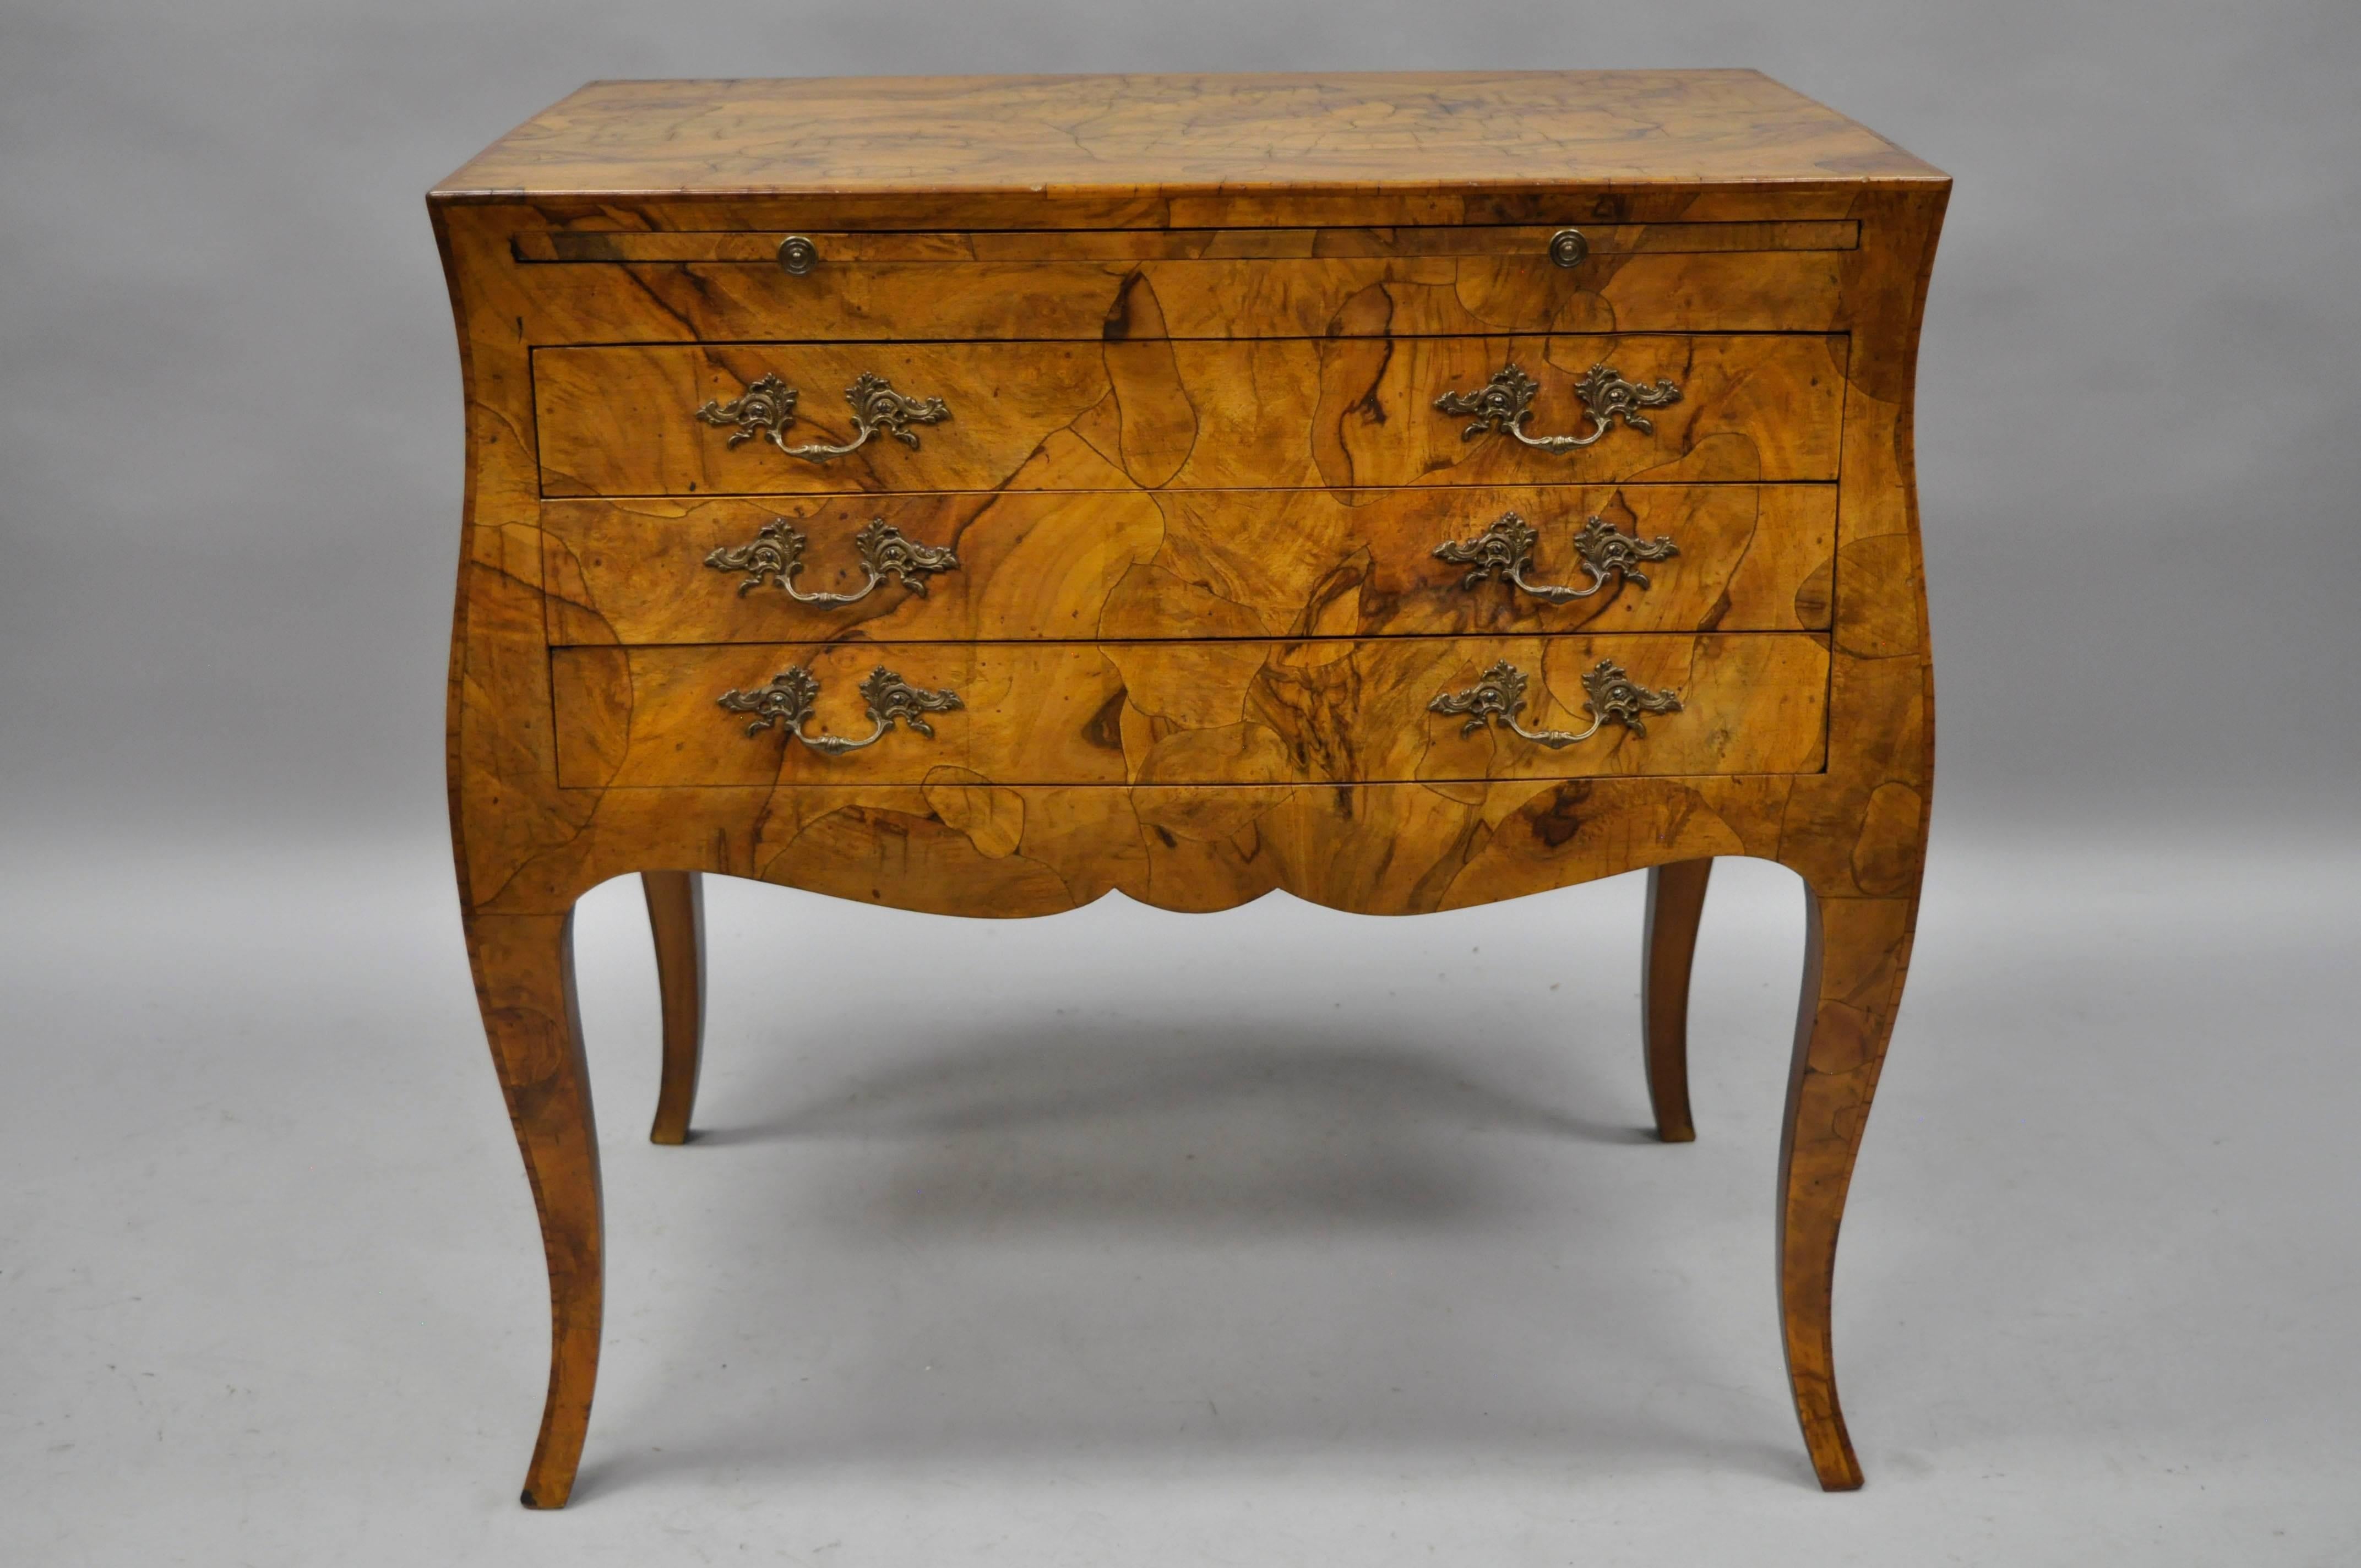 Stunning Italian olivewood French Louis XV style commode. Item features beautiful bookmatched patchwork olive wood veneers, pull-out surface, ornate brass handles, three drawers, shapely cabriole legs, and is finished all the way around. Item